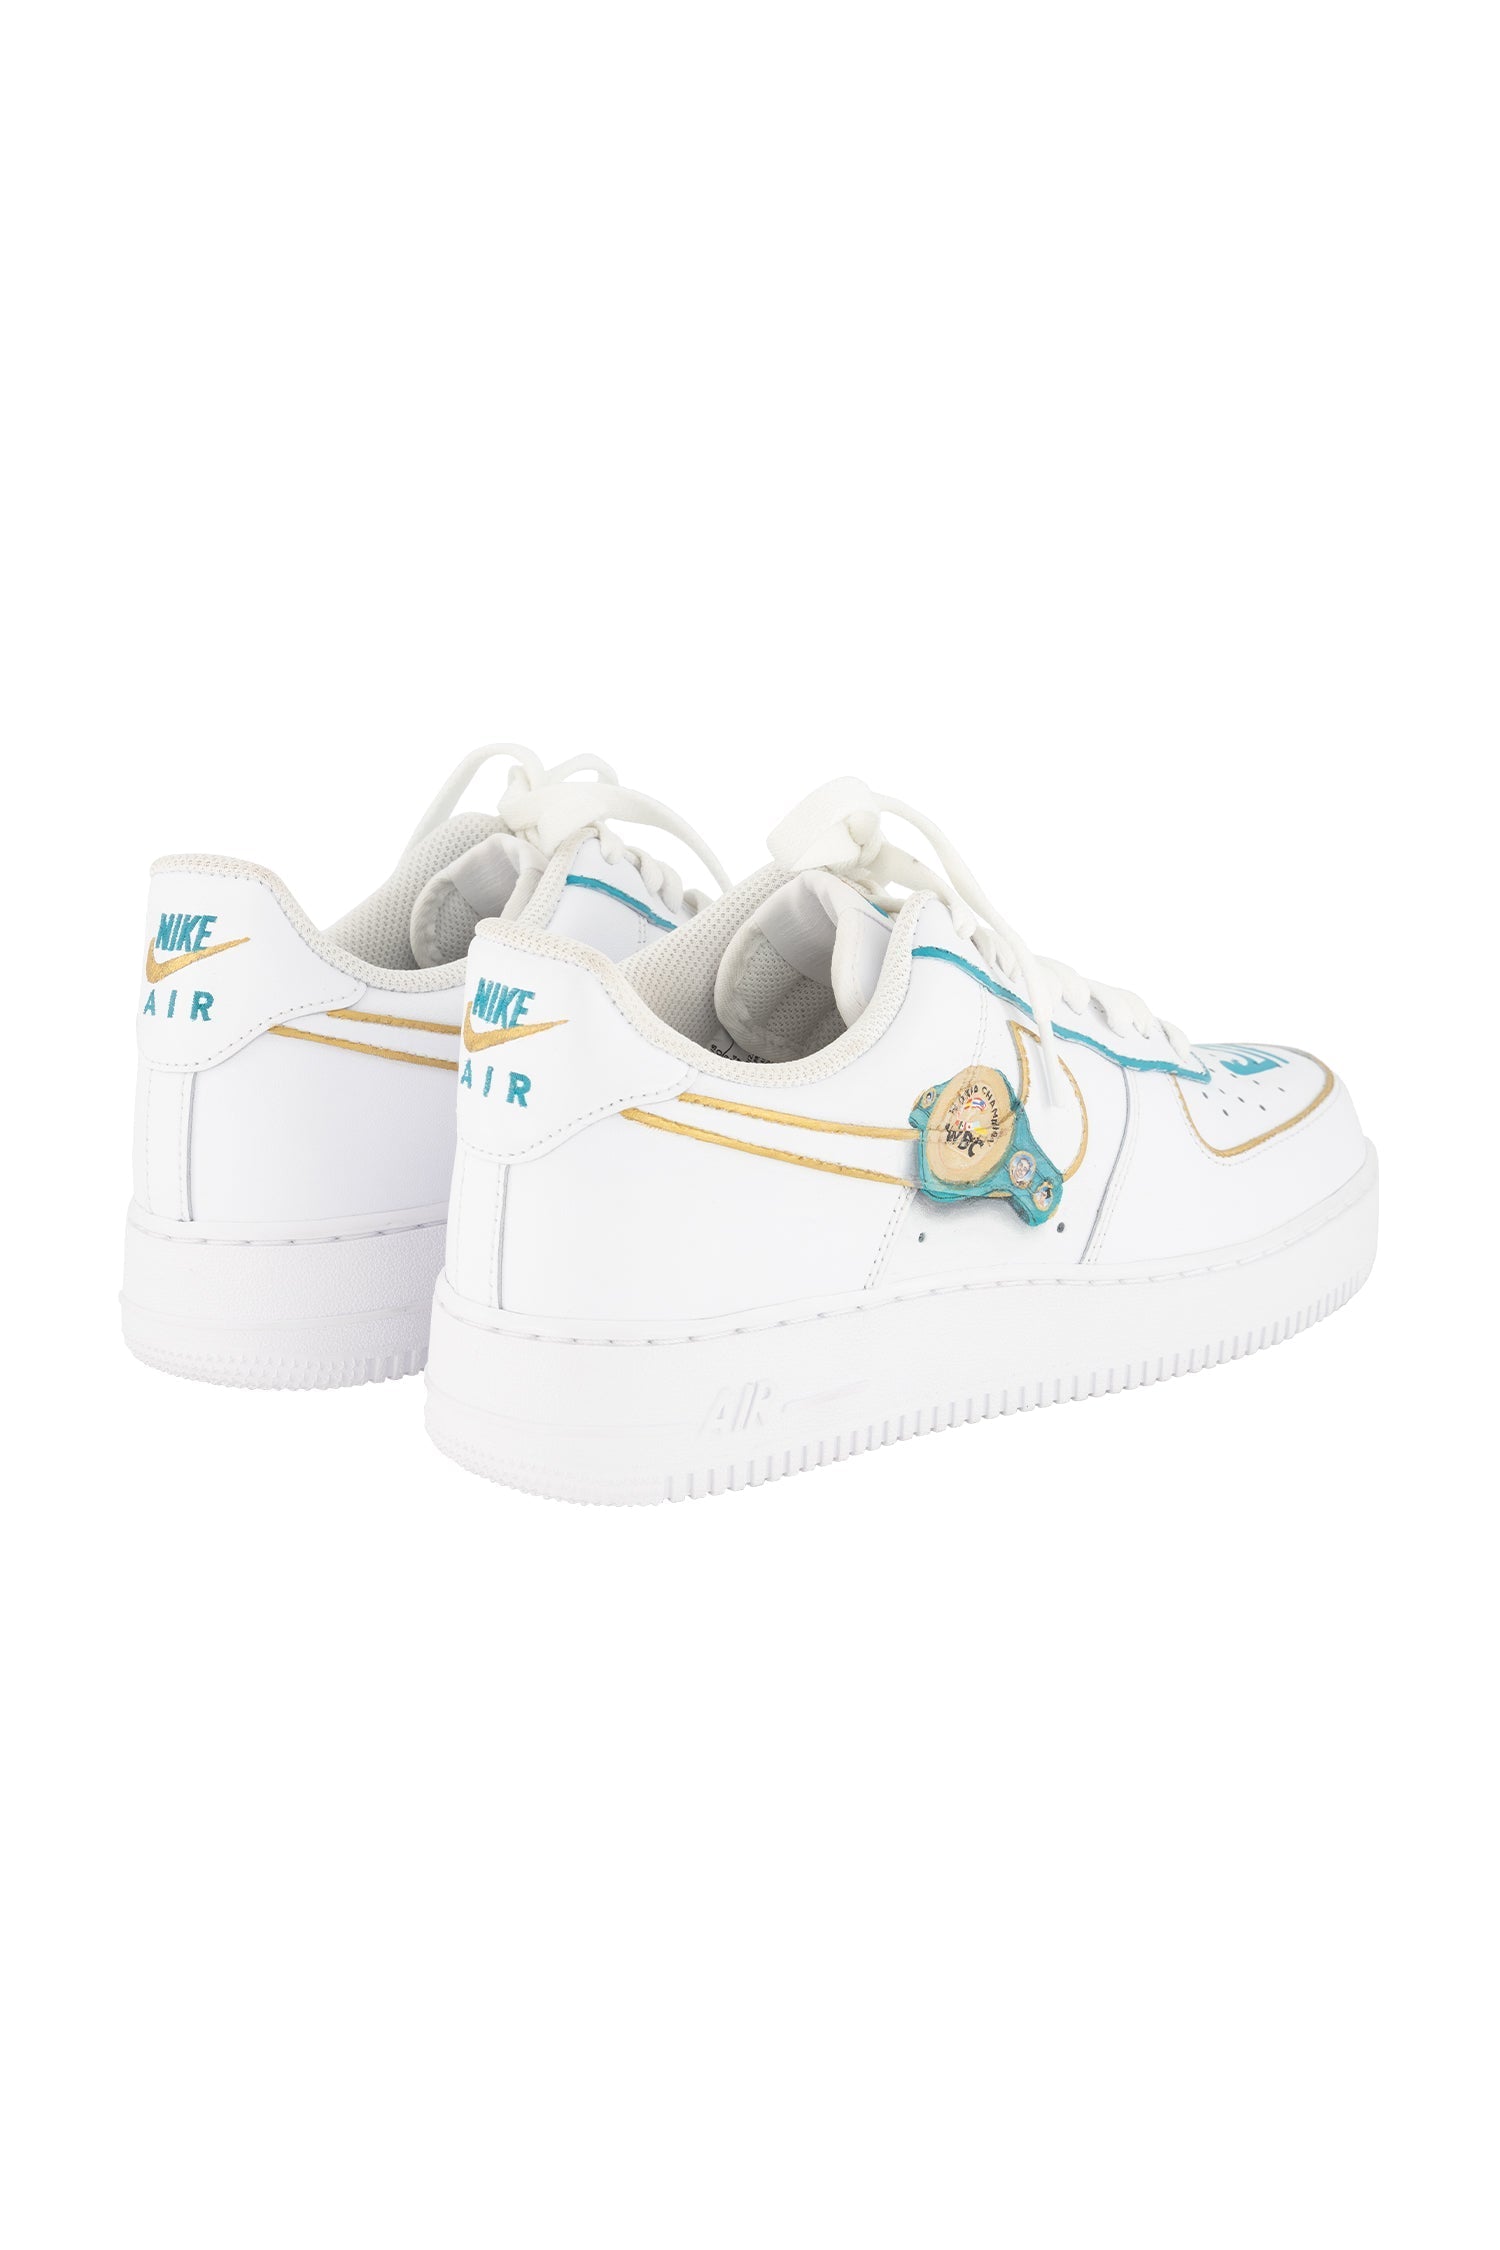 WBC Store Nike Air Force 1 Special Edition WBC Green Belt